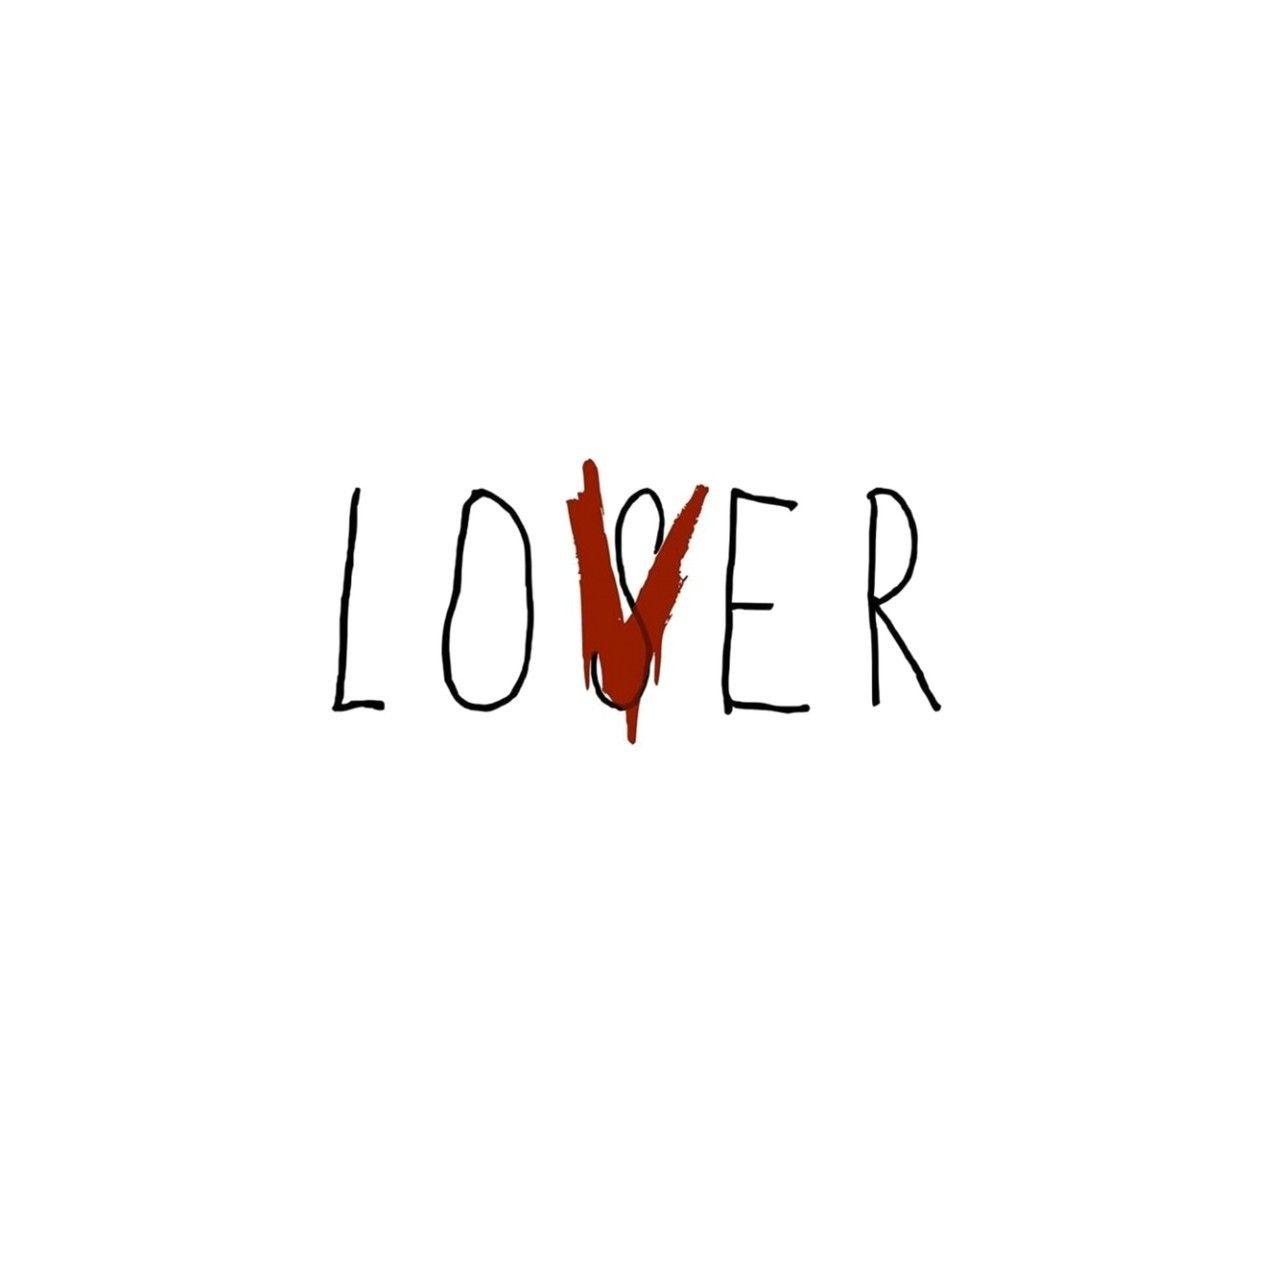 Lover Loser Wallpapers - Top Free Lover Loser Backgrounds - WallpaperAccess